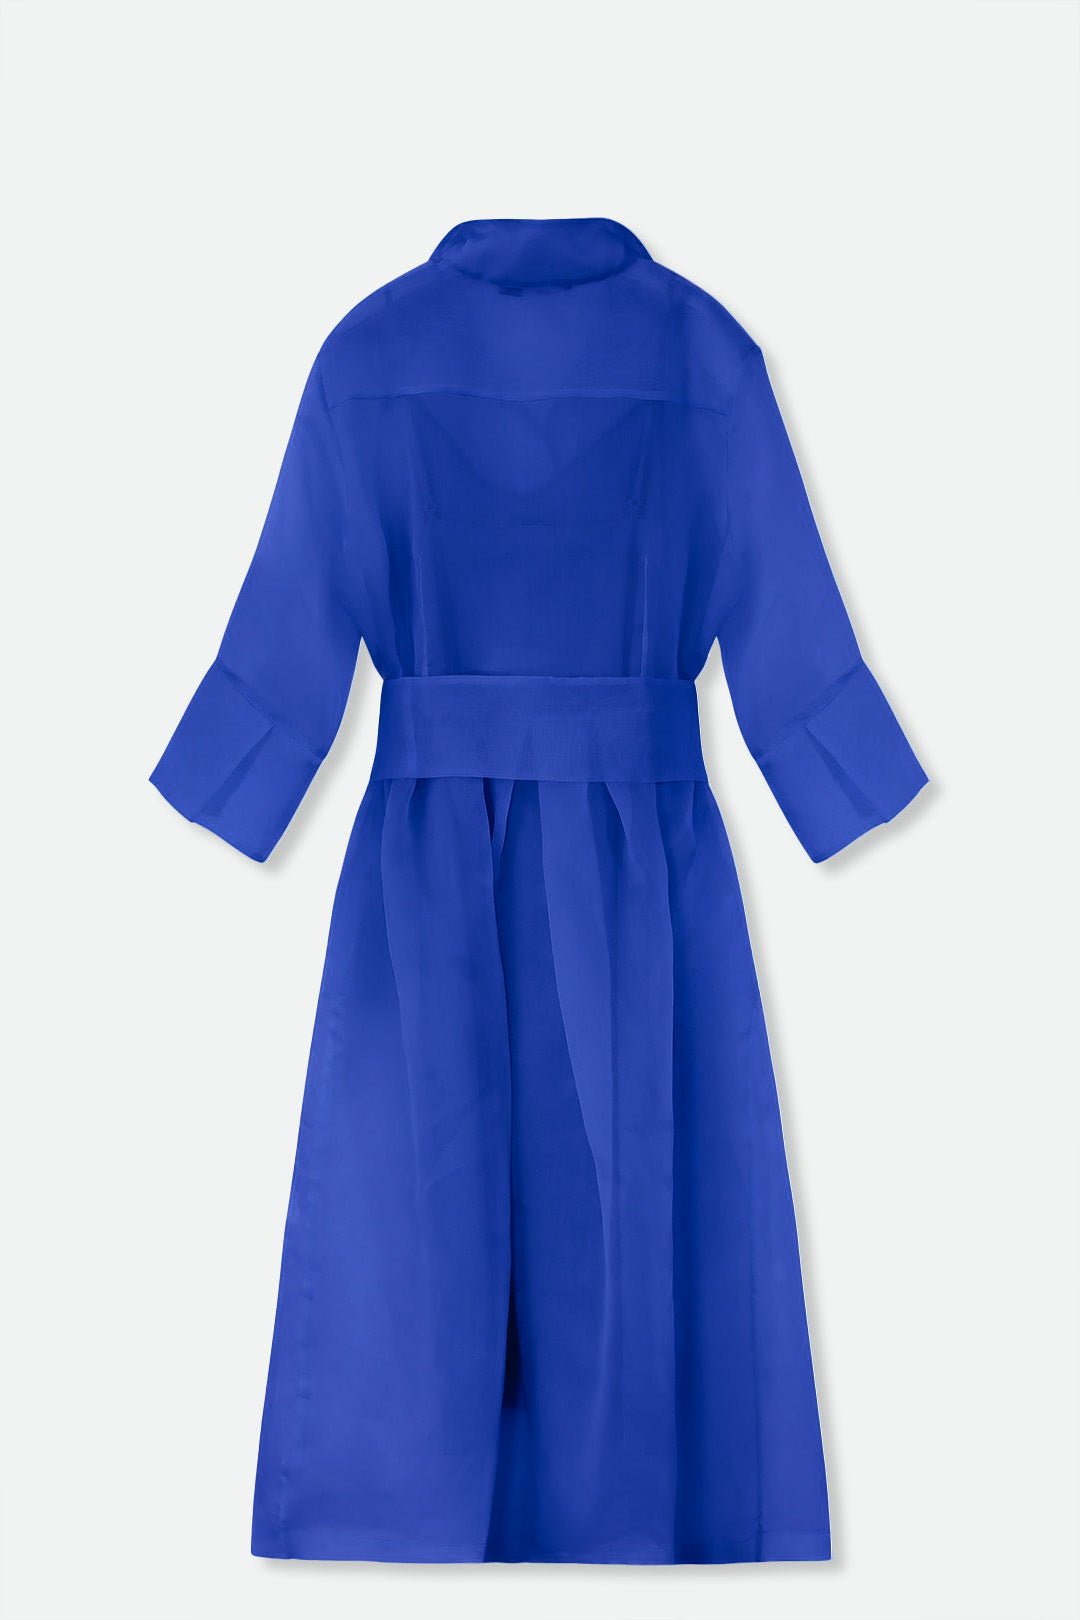 GABRIELLE DRESS IN SILK ORGANZA IMPERIAL BLUE - PRE-ORDER AVAILABLE - Jarbo